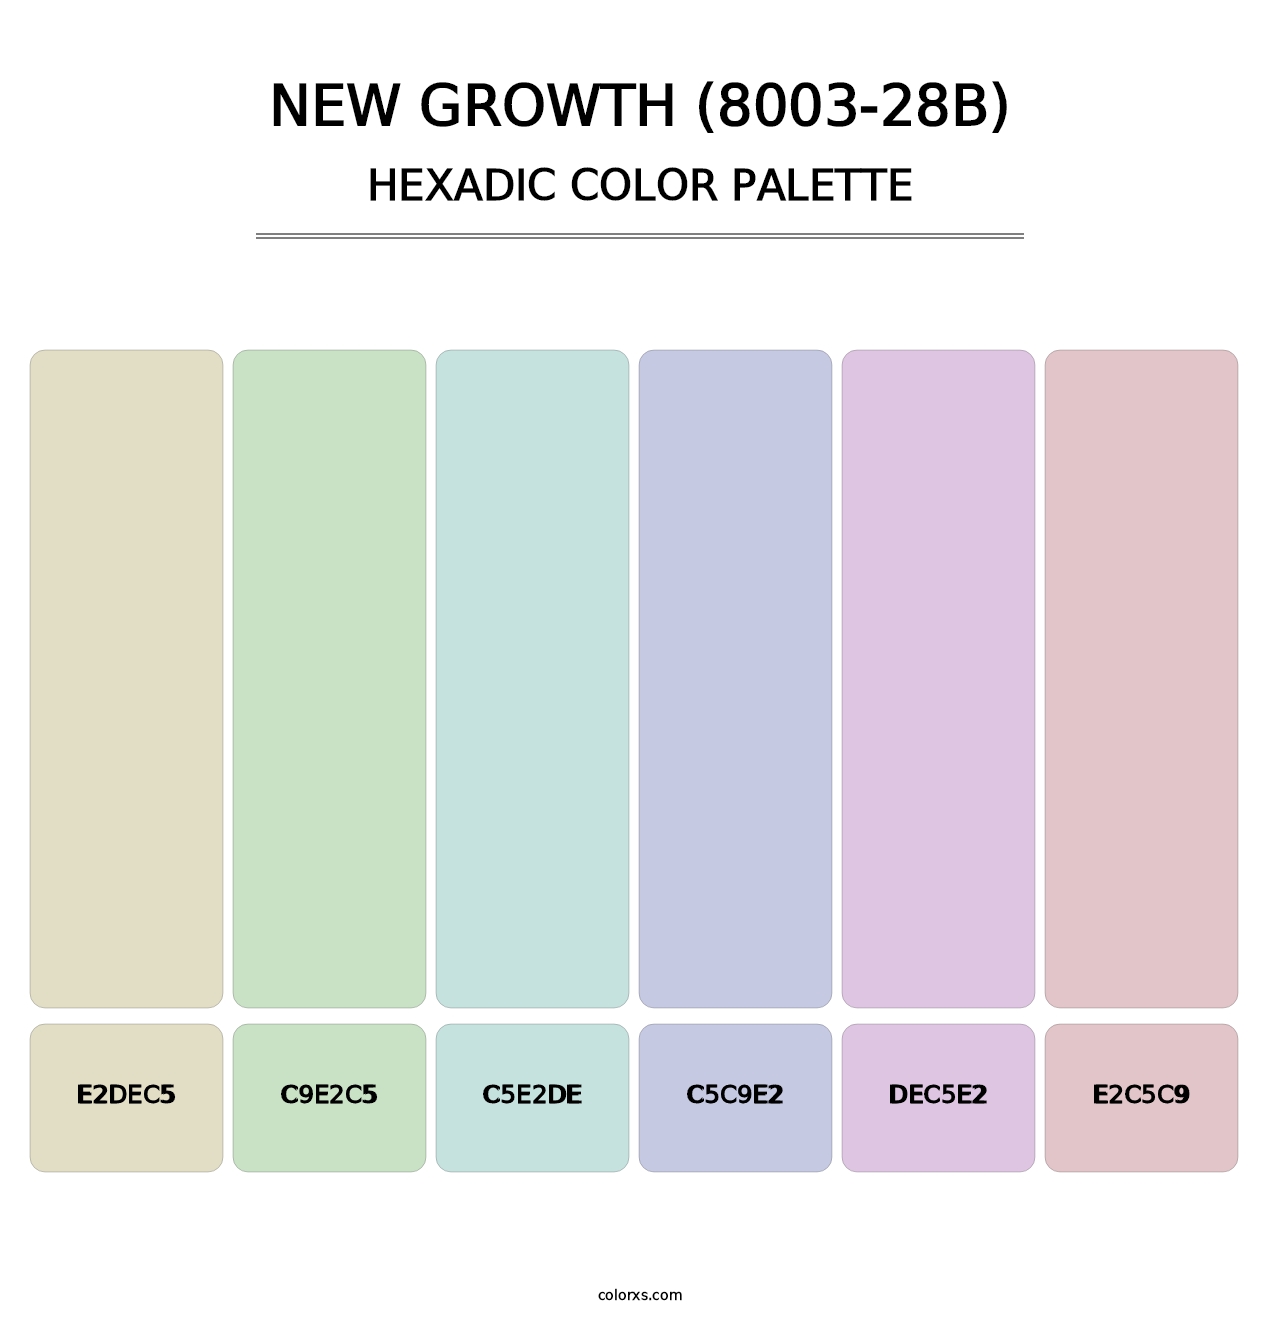 New Growth (8003-28B) - Hexadic Color Palette